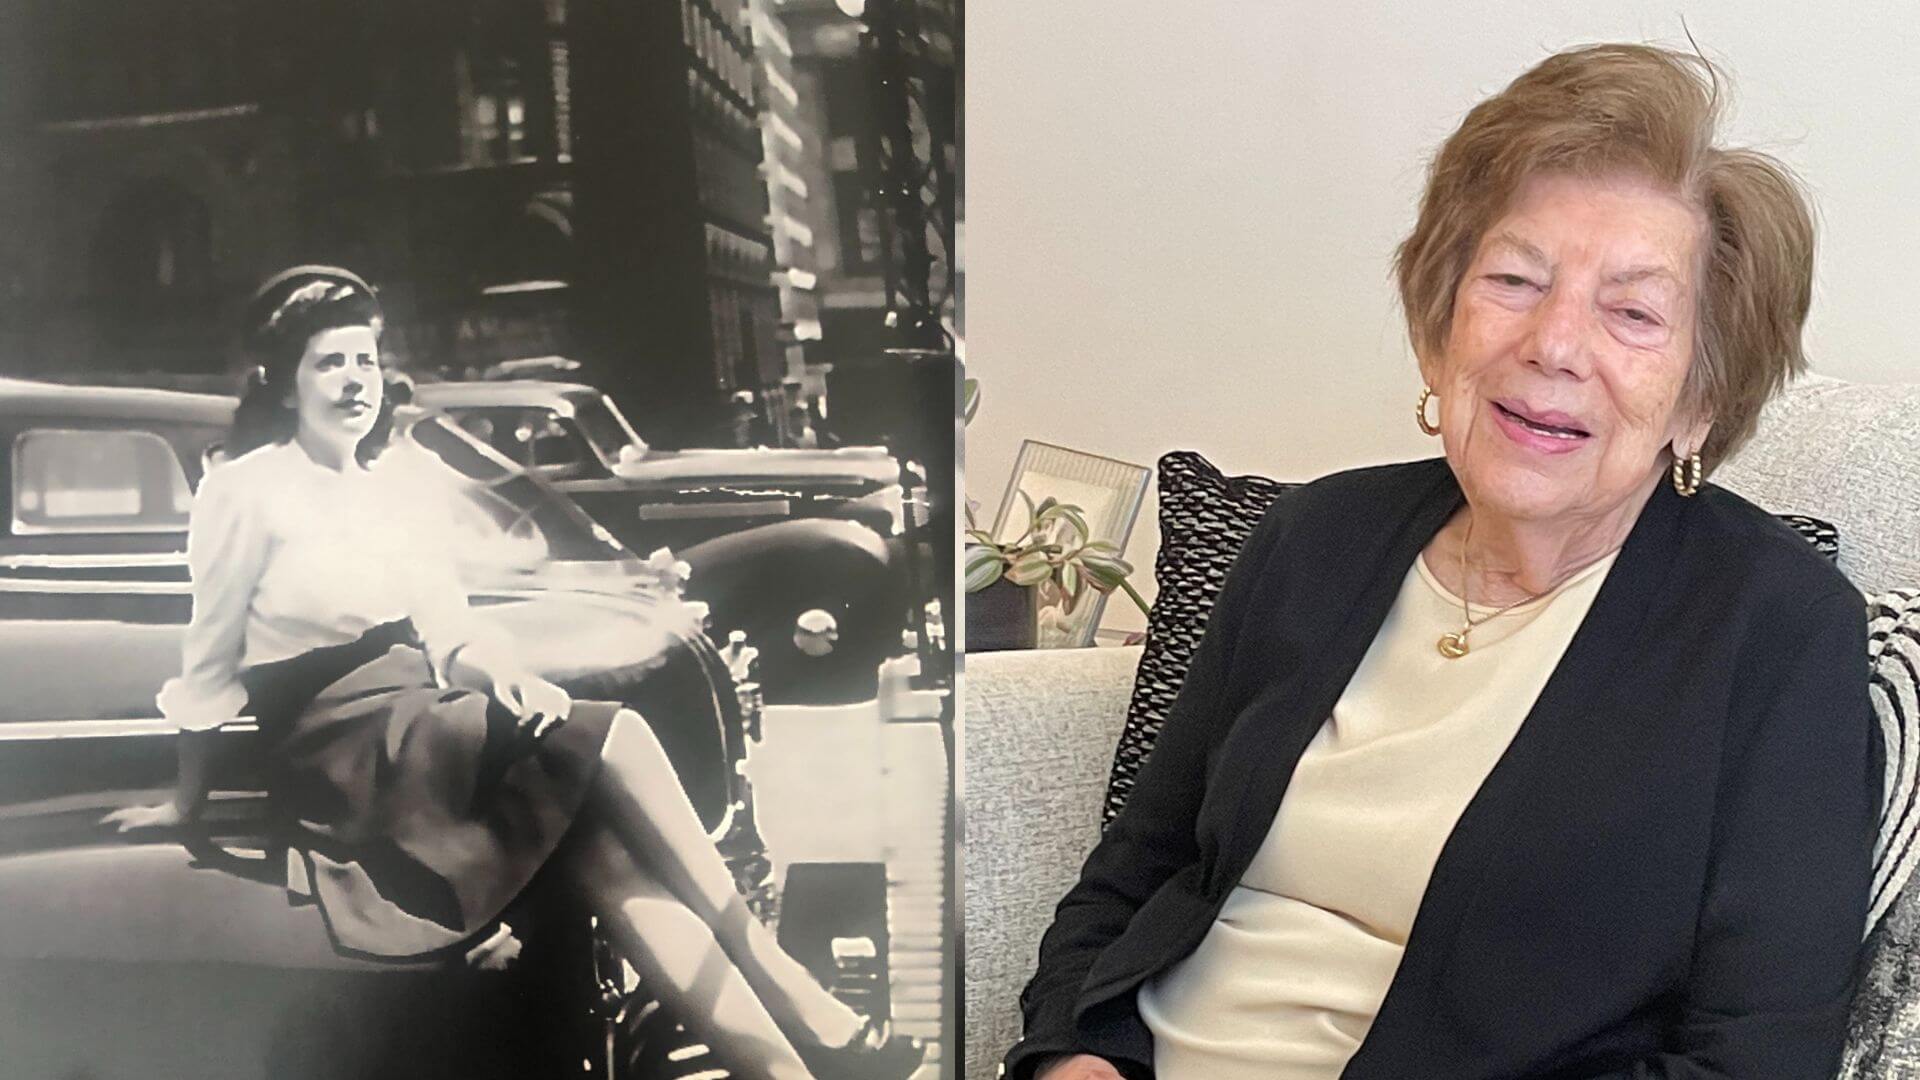 Then and Now: Paula Goldstein worked as a USO hostess in WWII and now lives part of the year in an apartment in New Jersey.